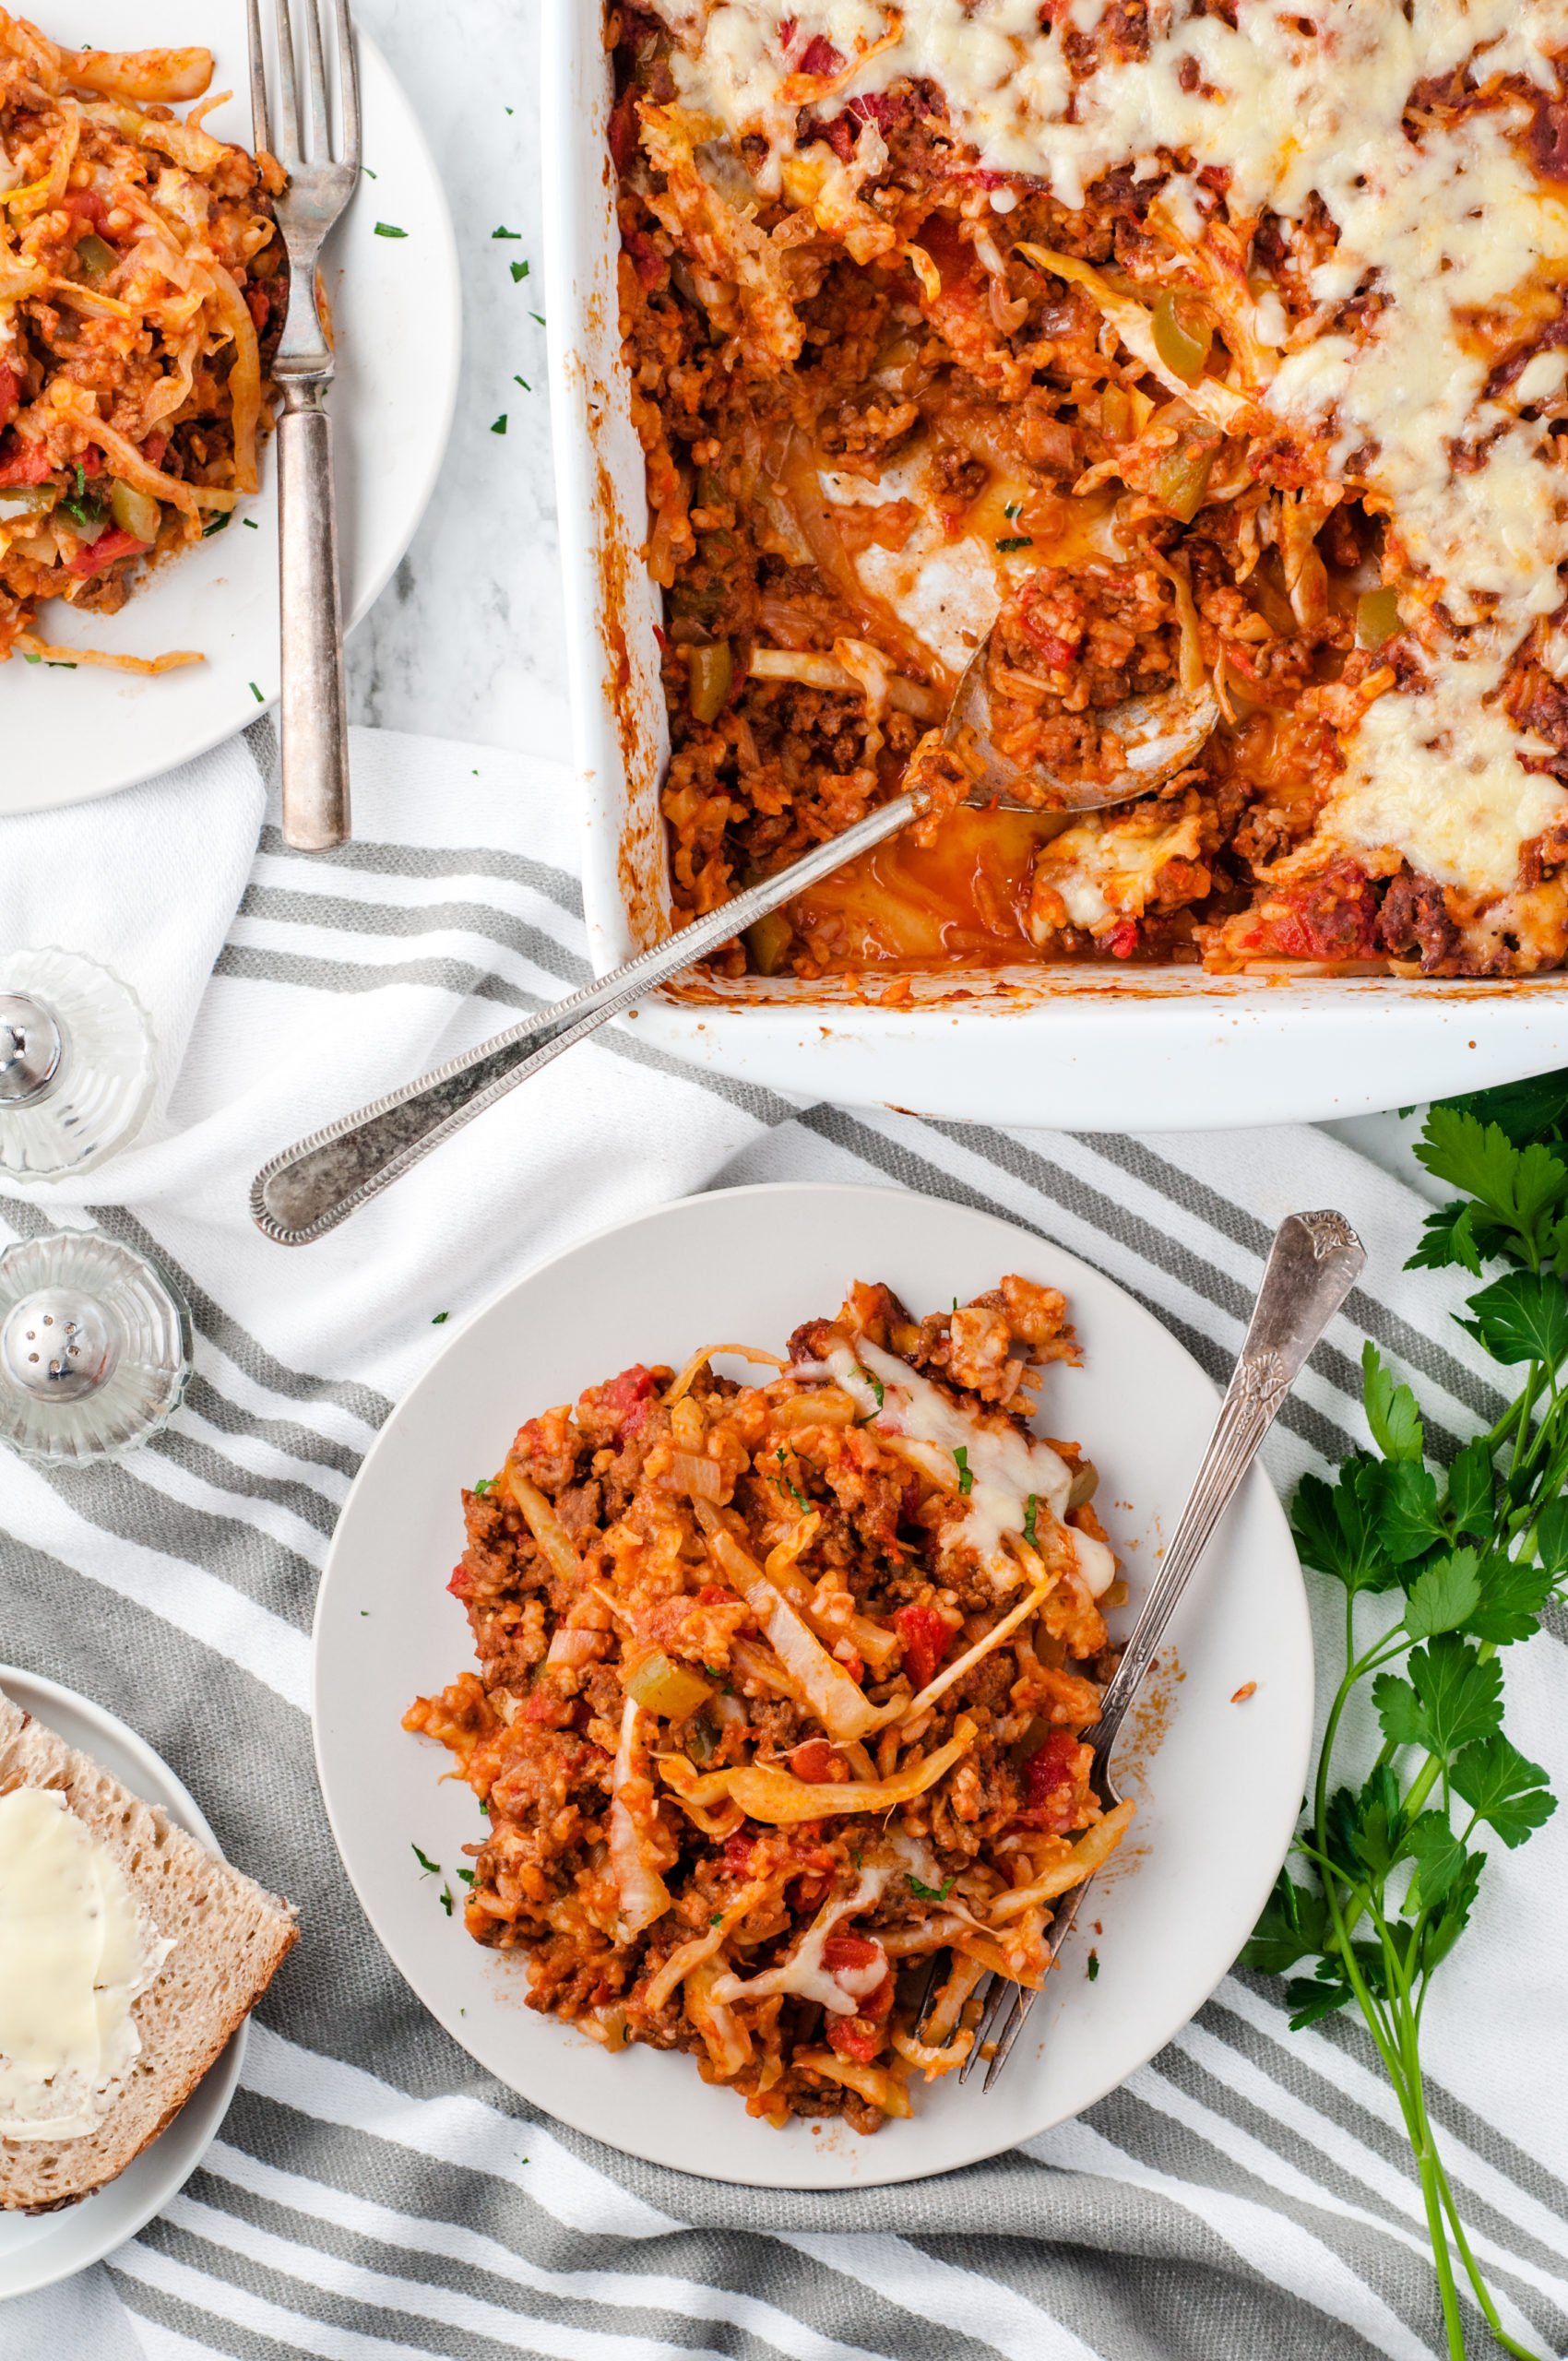 Cabbage Roll Casserole Recipe from Family Fresh Meals  #cabbage #cabbageroll #beef #groundbeef #casserole #lowcarb via @familyfresh